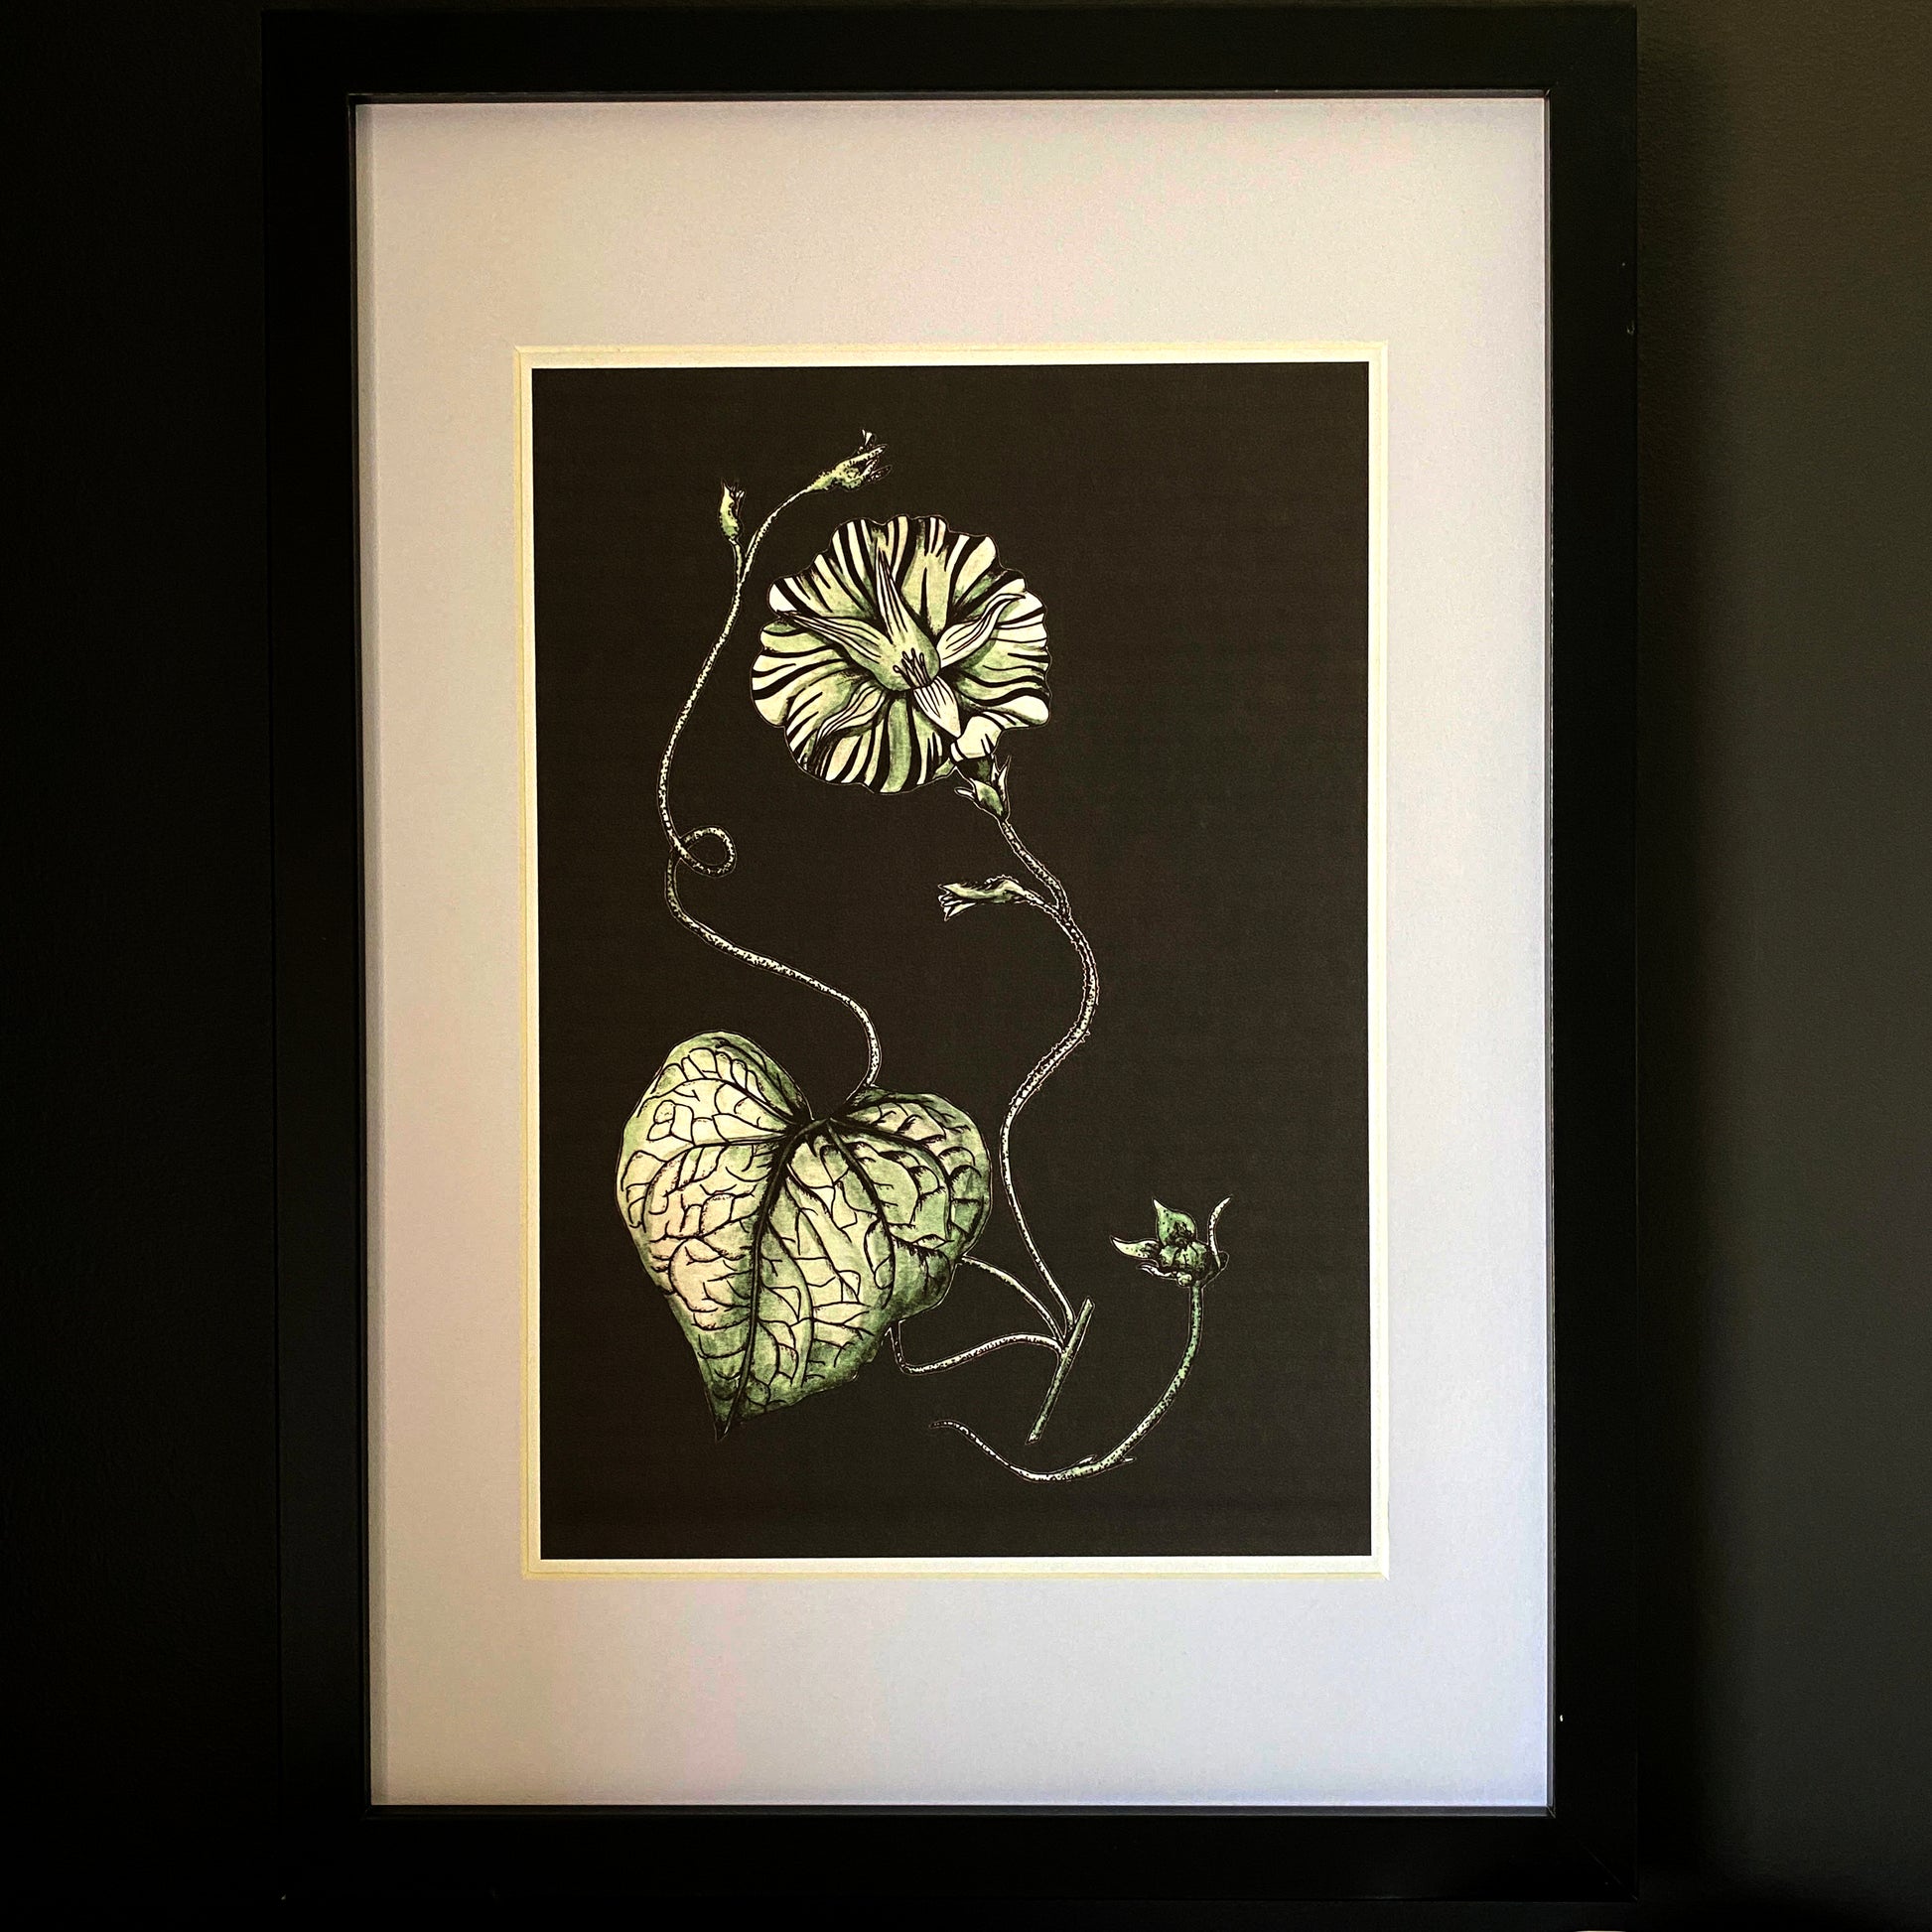 Stunning vintage style botanical bloom, painted using sage green watercolour, the veins and petals have depth from the line art drawn in